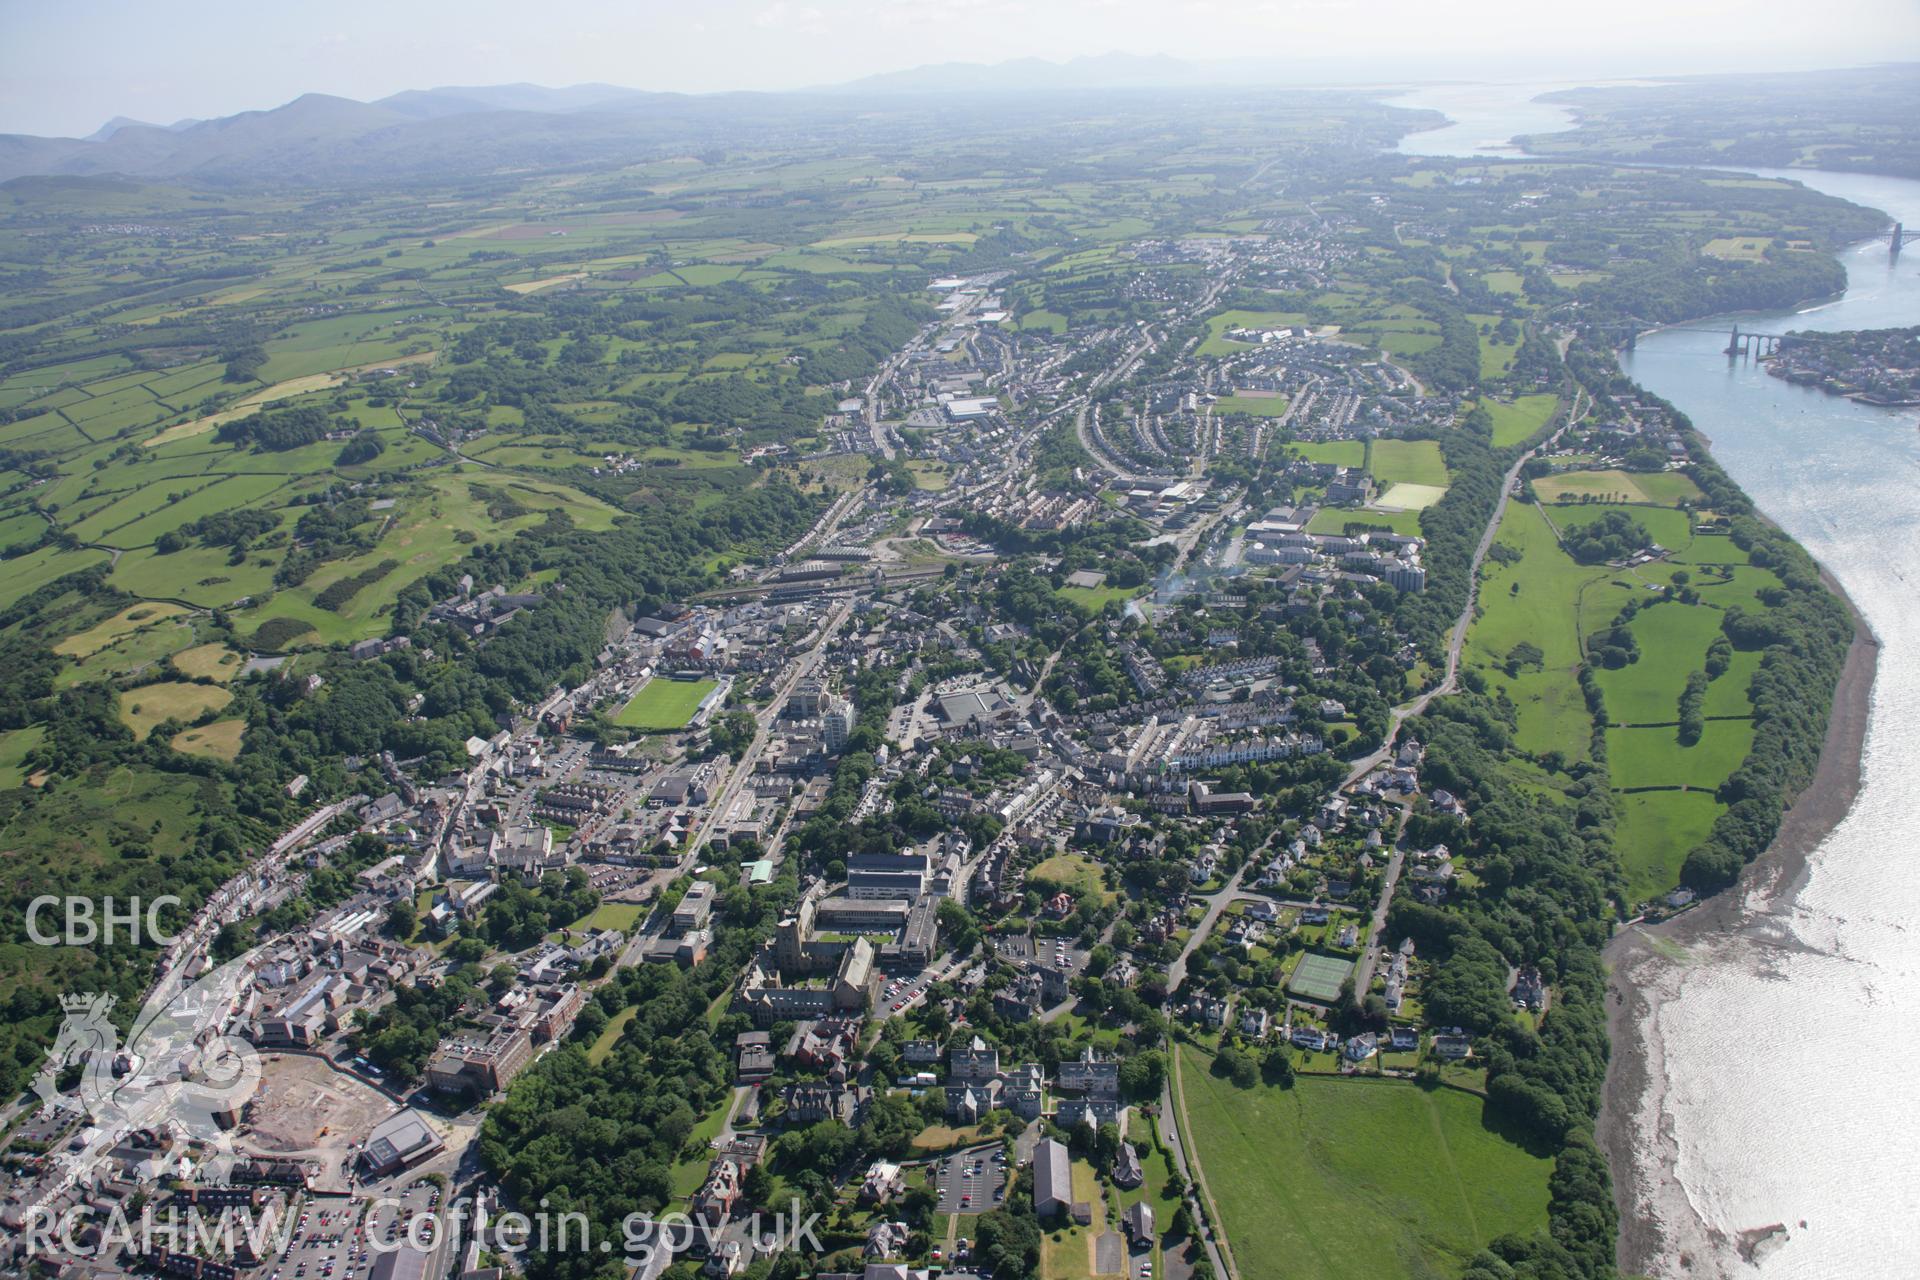 RCAHMW colour oblique aerial photograph of Bangor from the north-east. Taken on 14 June 2006 by Toby Driver.